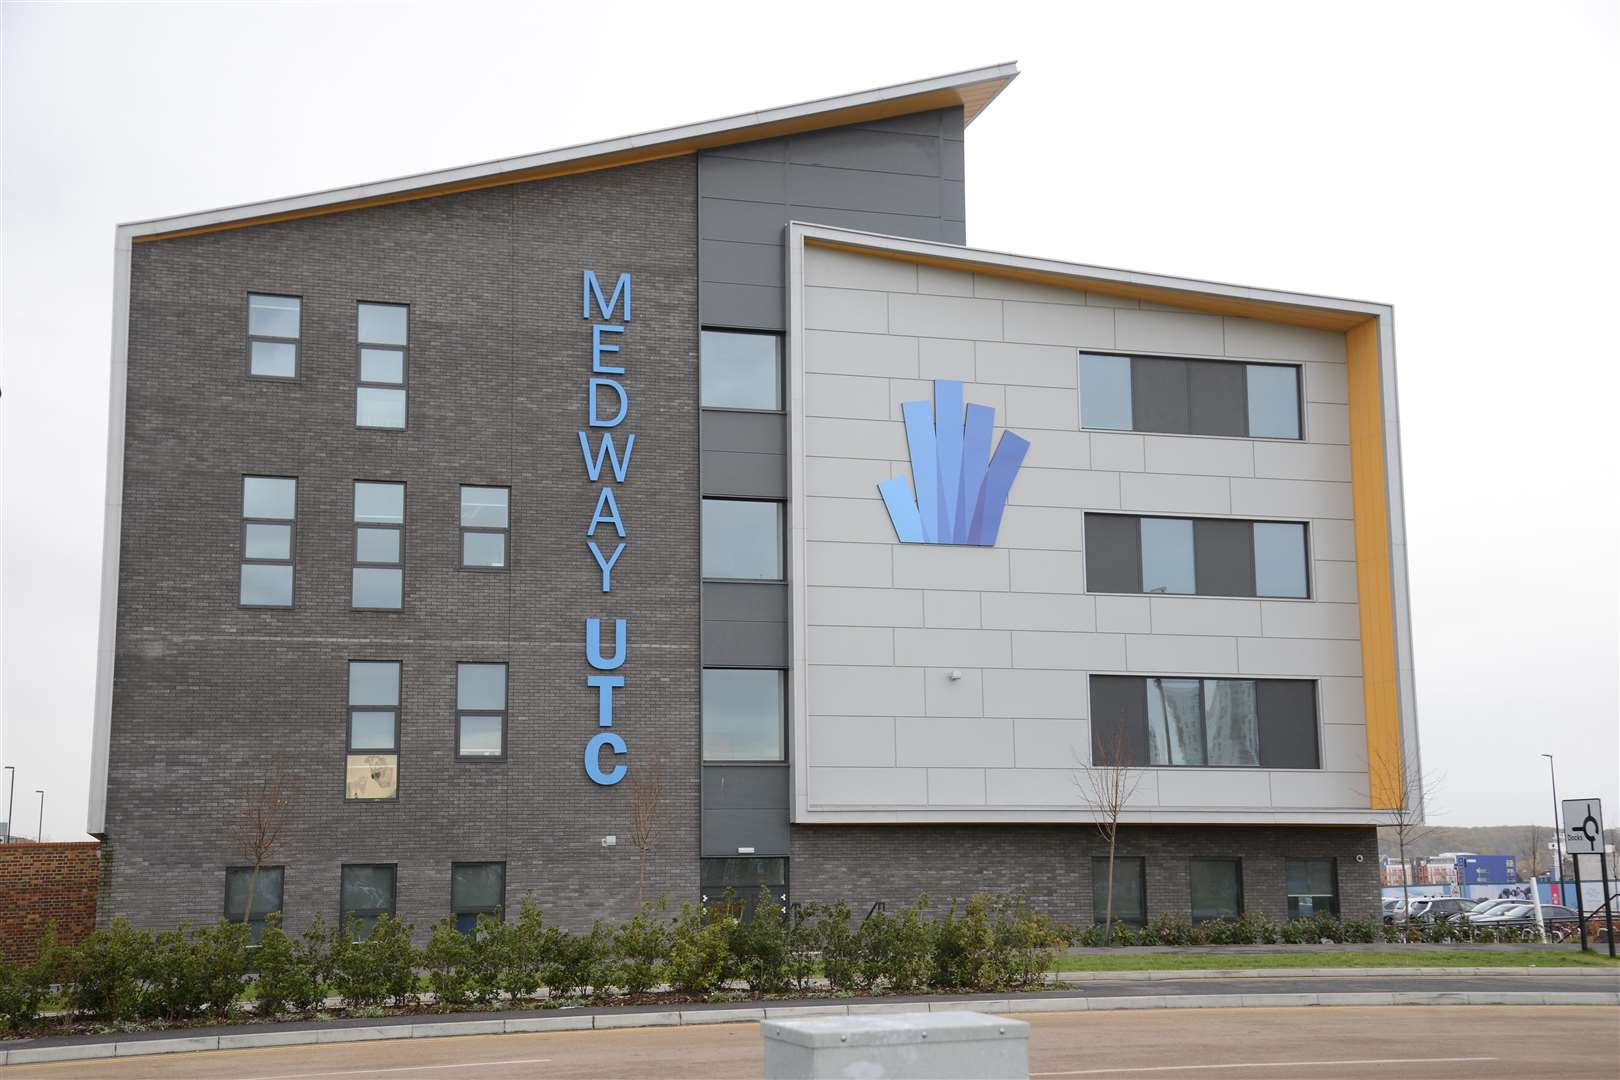 Medway UTC buildingMystery PicturesPicture: Gary Browne FM4584426 (1898056)